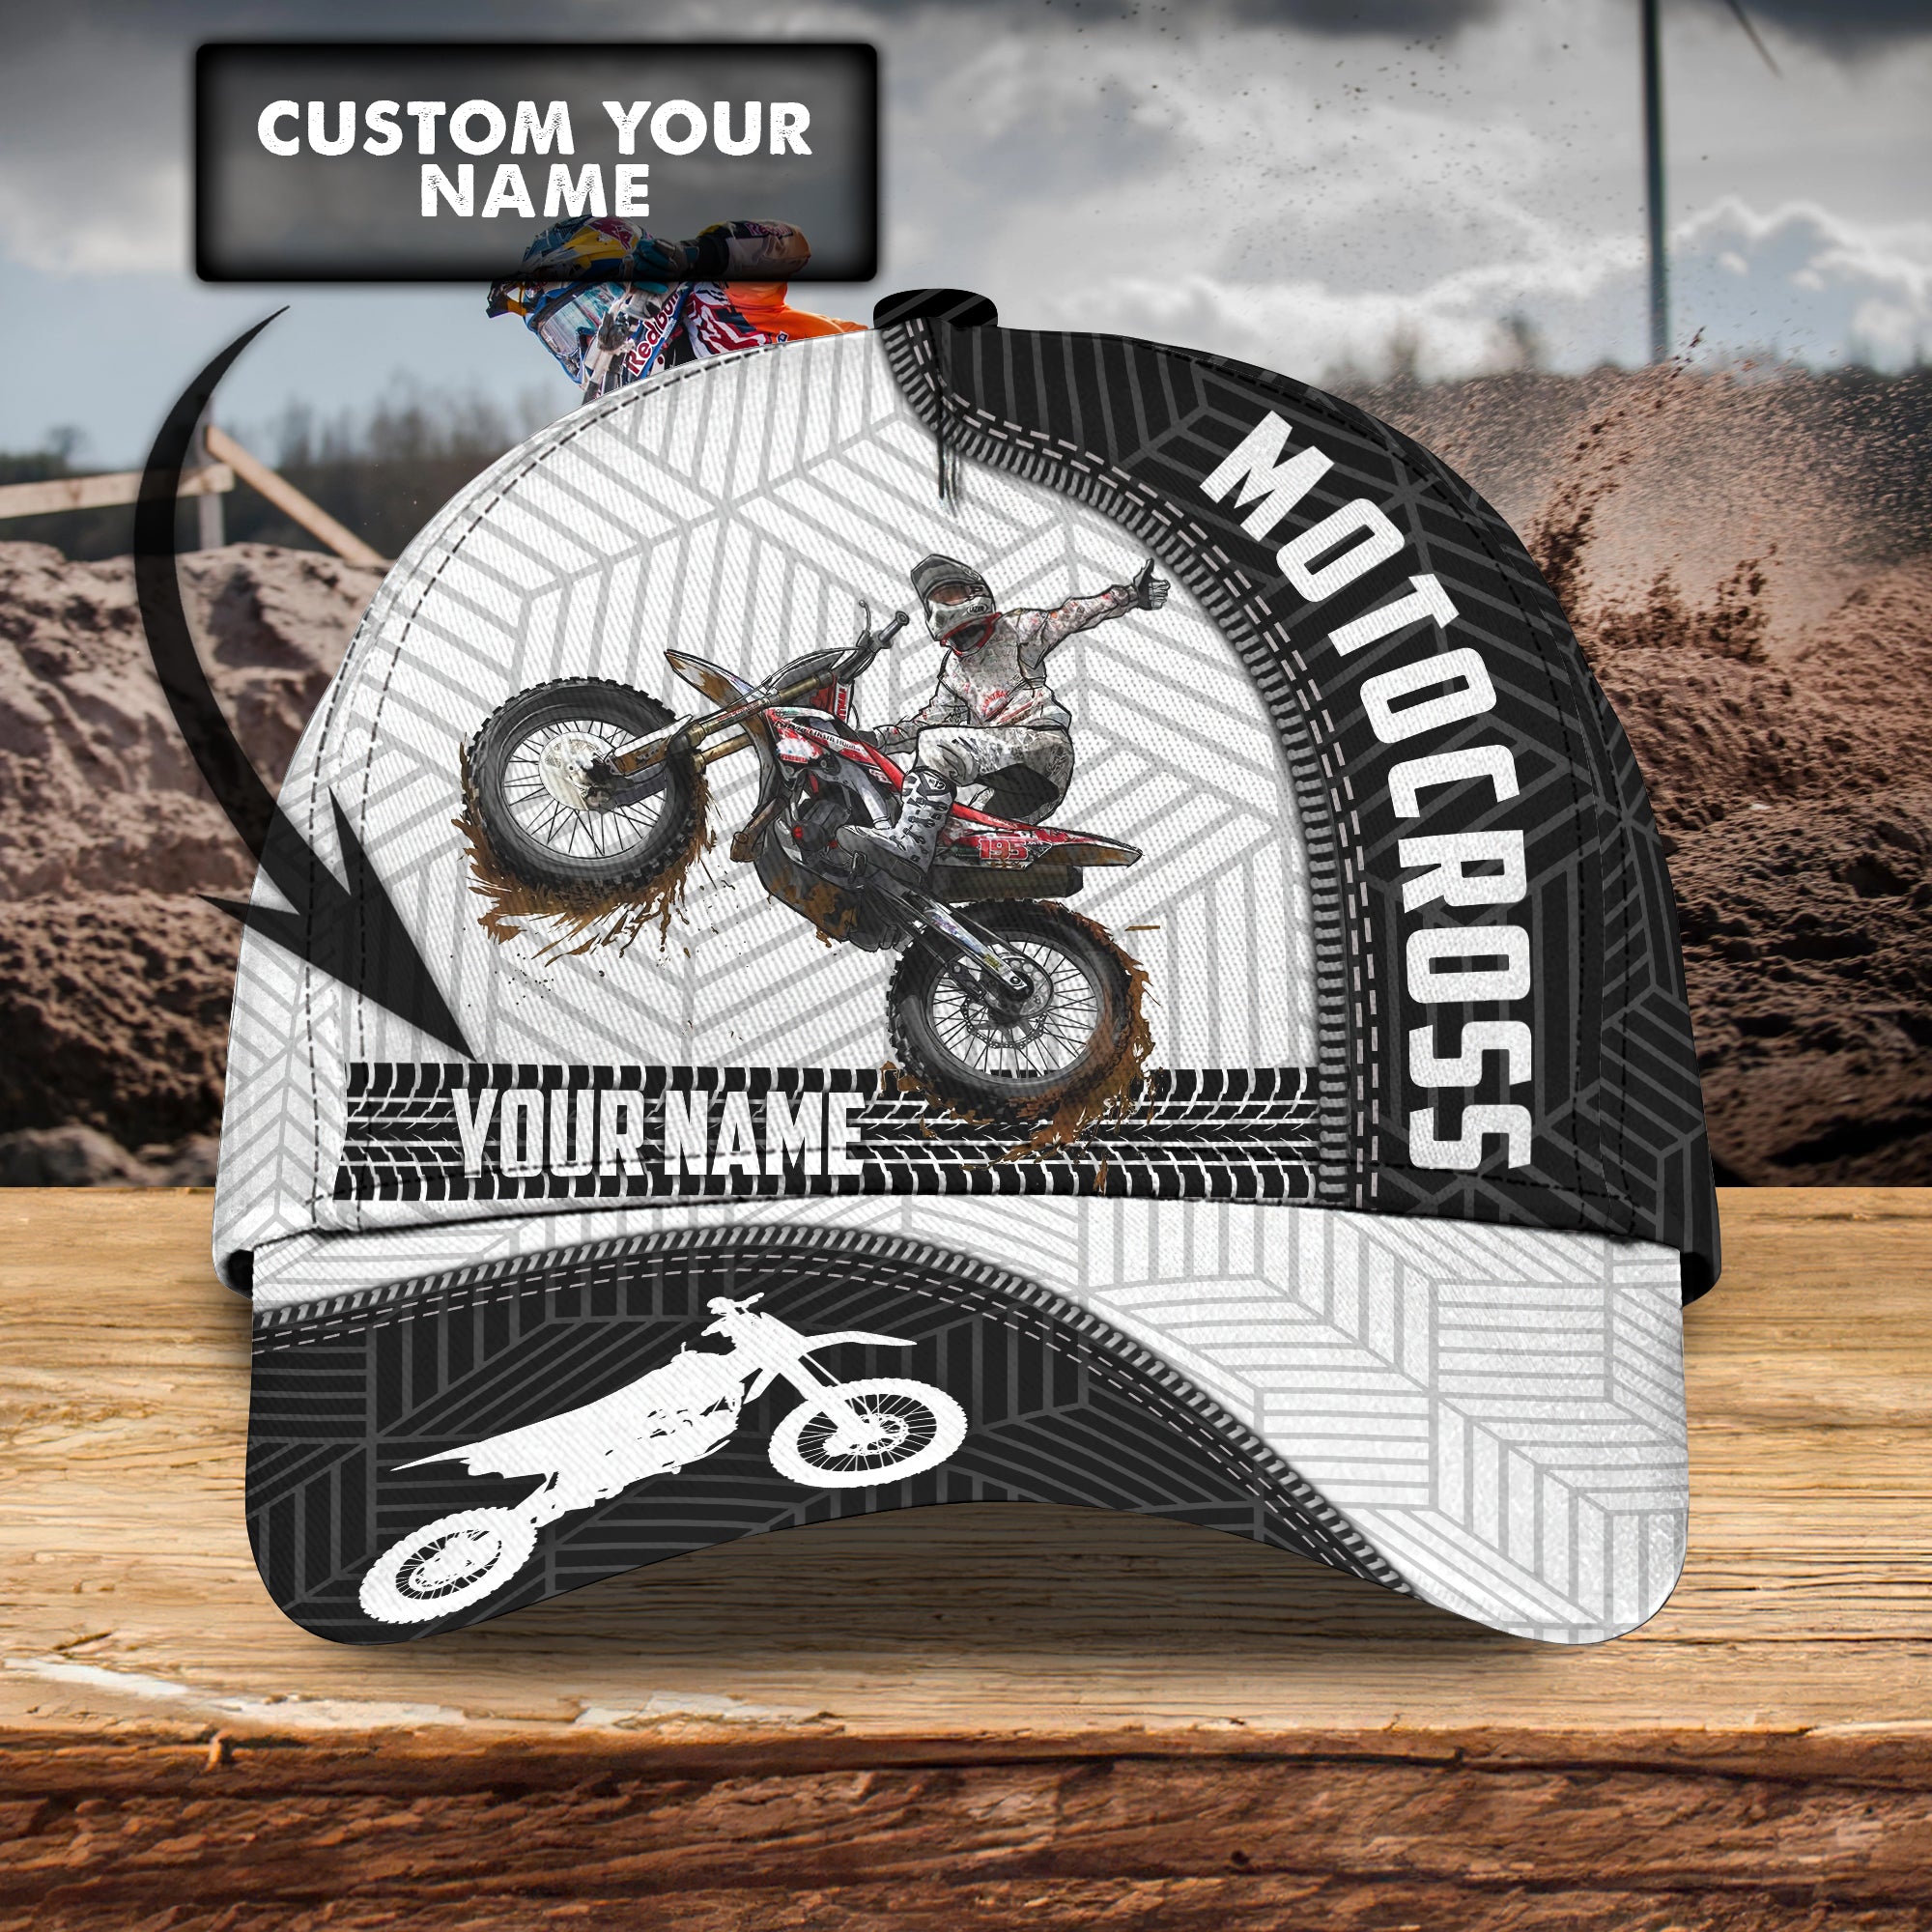 Motocross - Personalized Name Cap - Vtm99